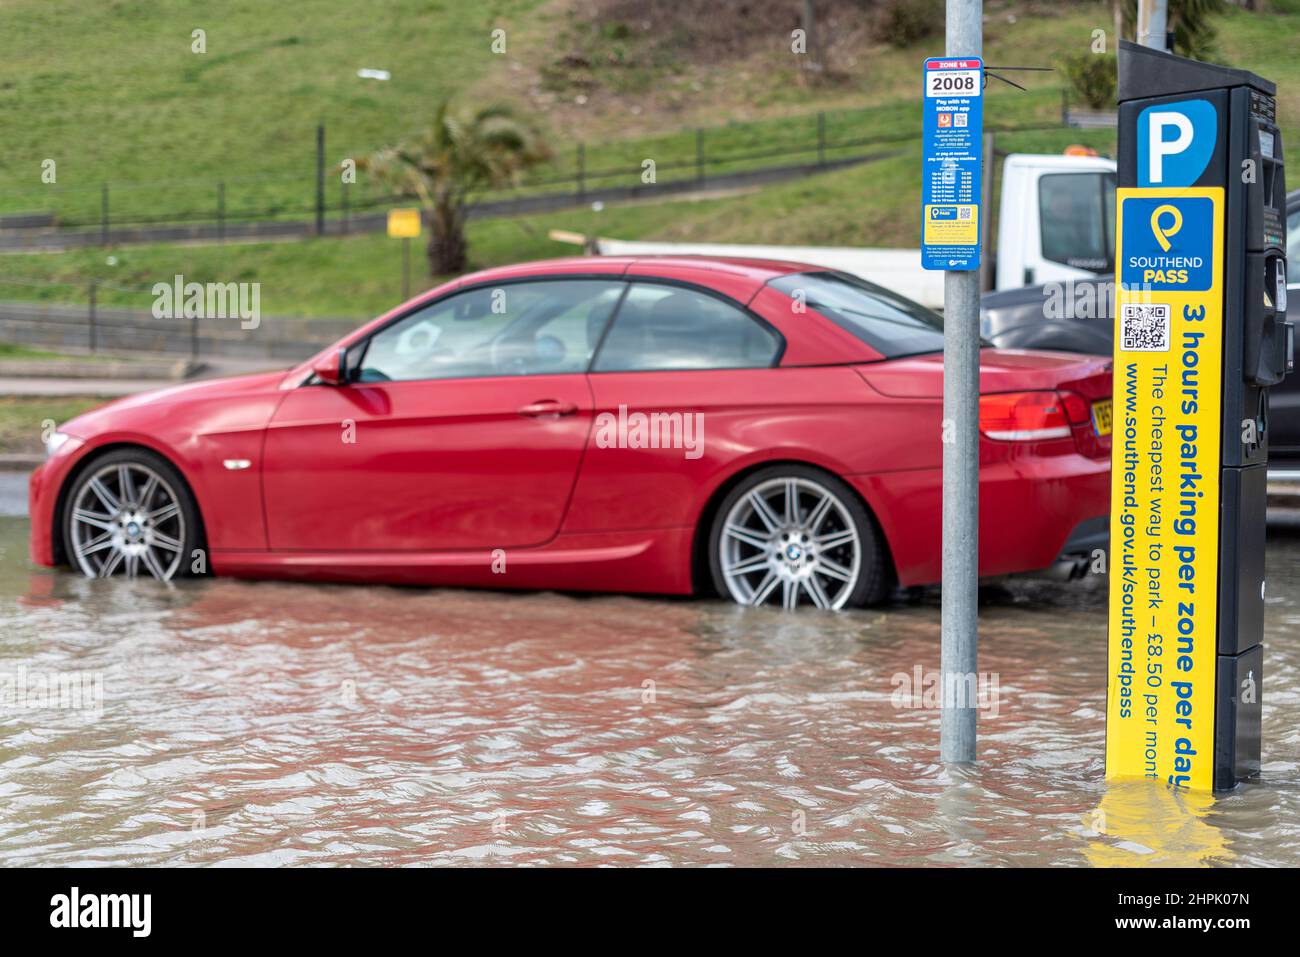 Flooding during a high surge tide combined with Storm Franklin in Southend on Sea, Essex, UK. Expensive BMW car and parking meter submerged in water Stock Photo